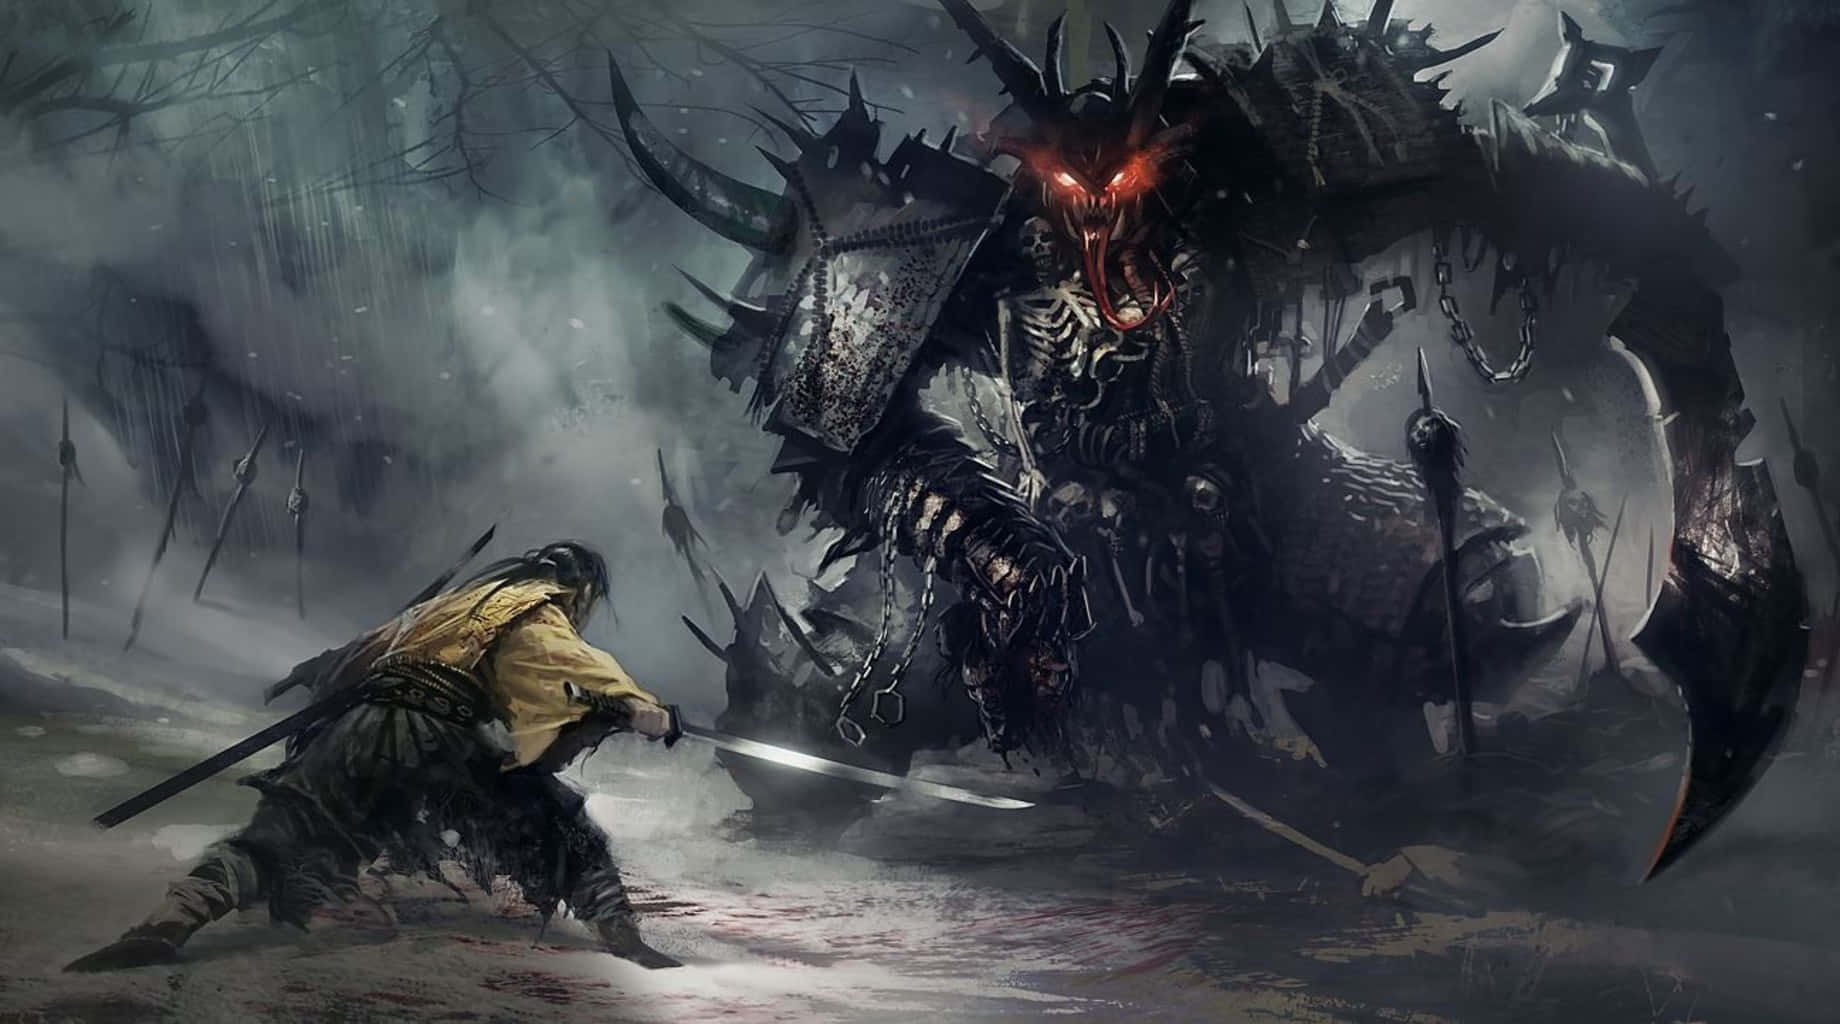 A Man Is Fighting A Demon In The Forest Wallpaper